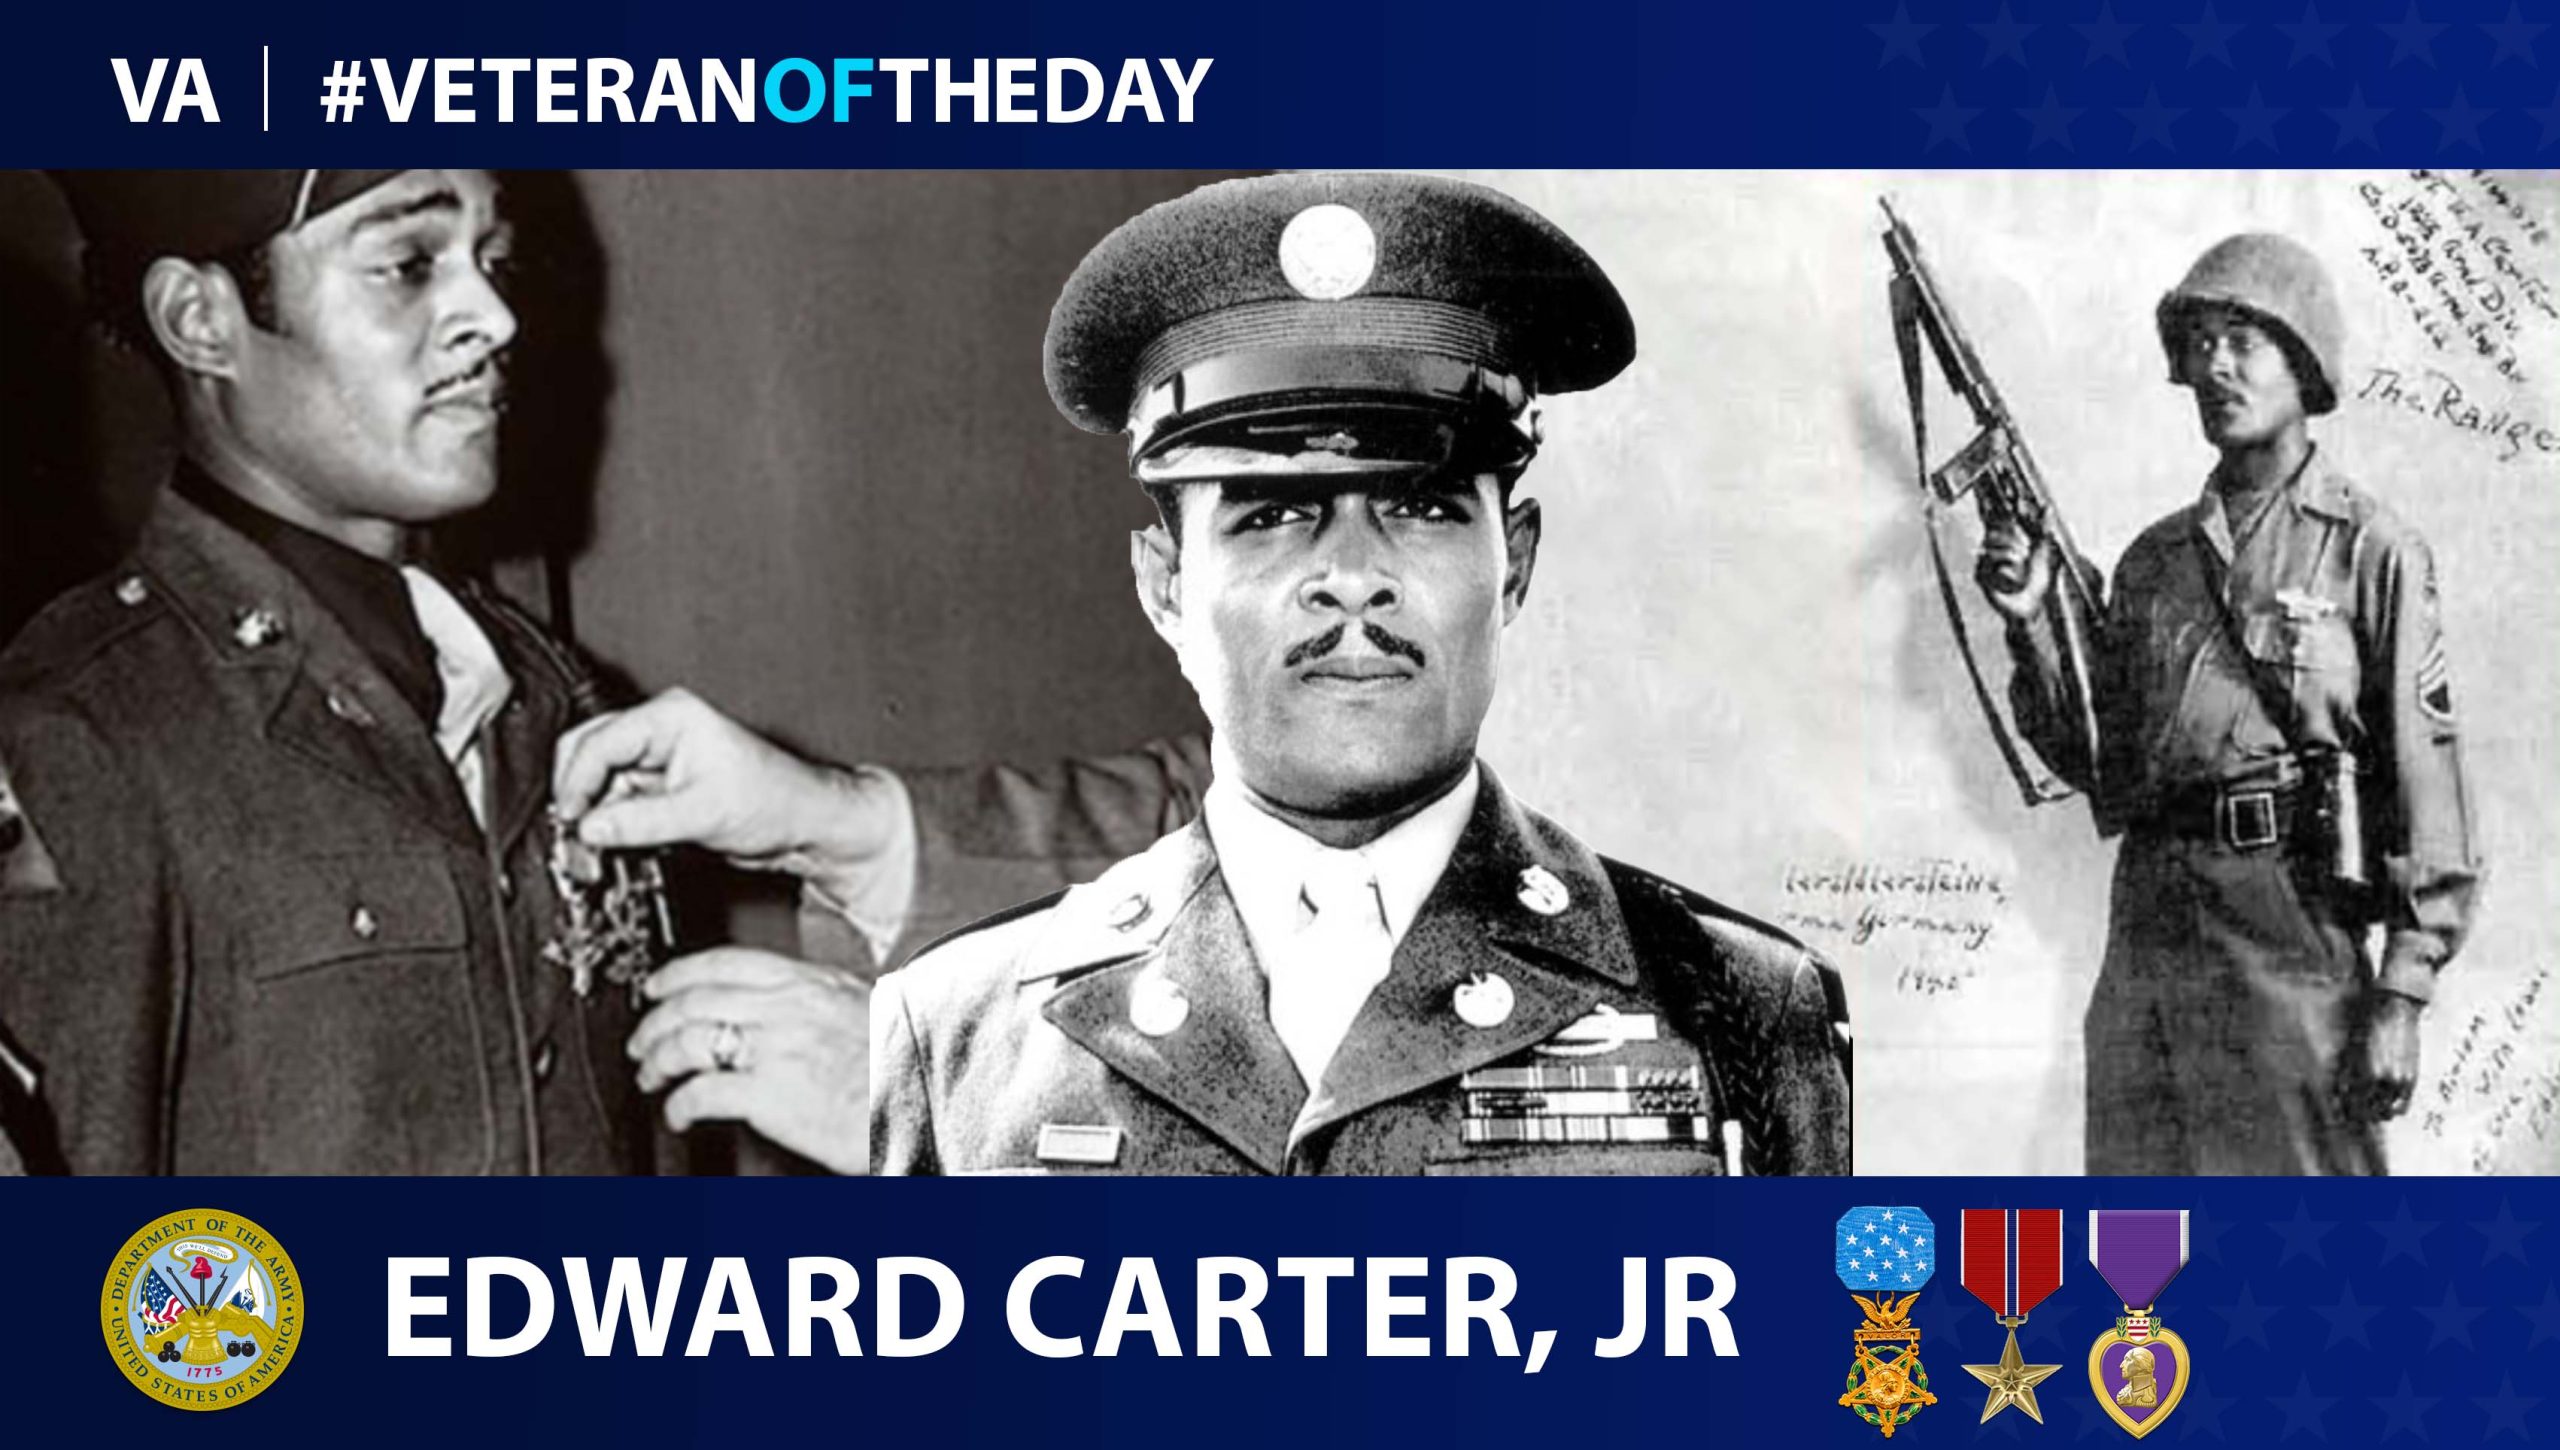 Army Veteran Edward Carter Jr. is today's Veteran of the Day.